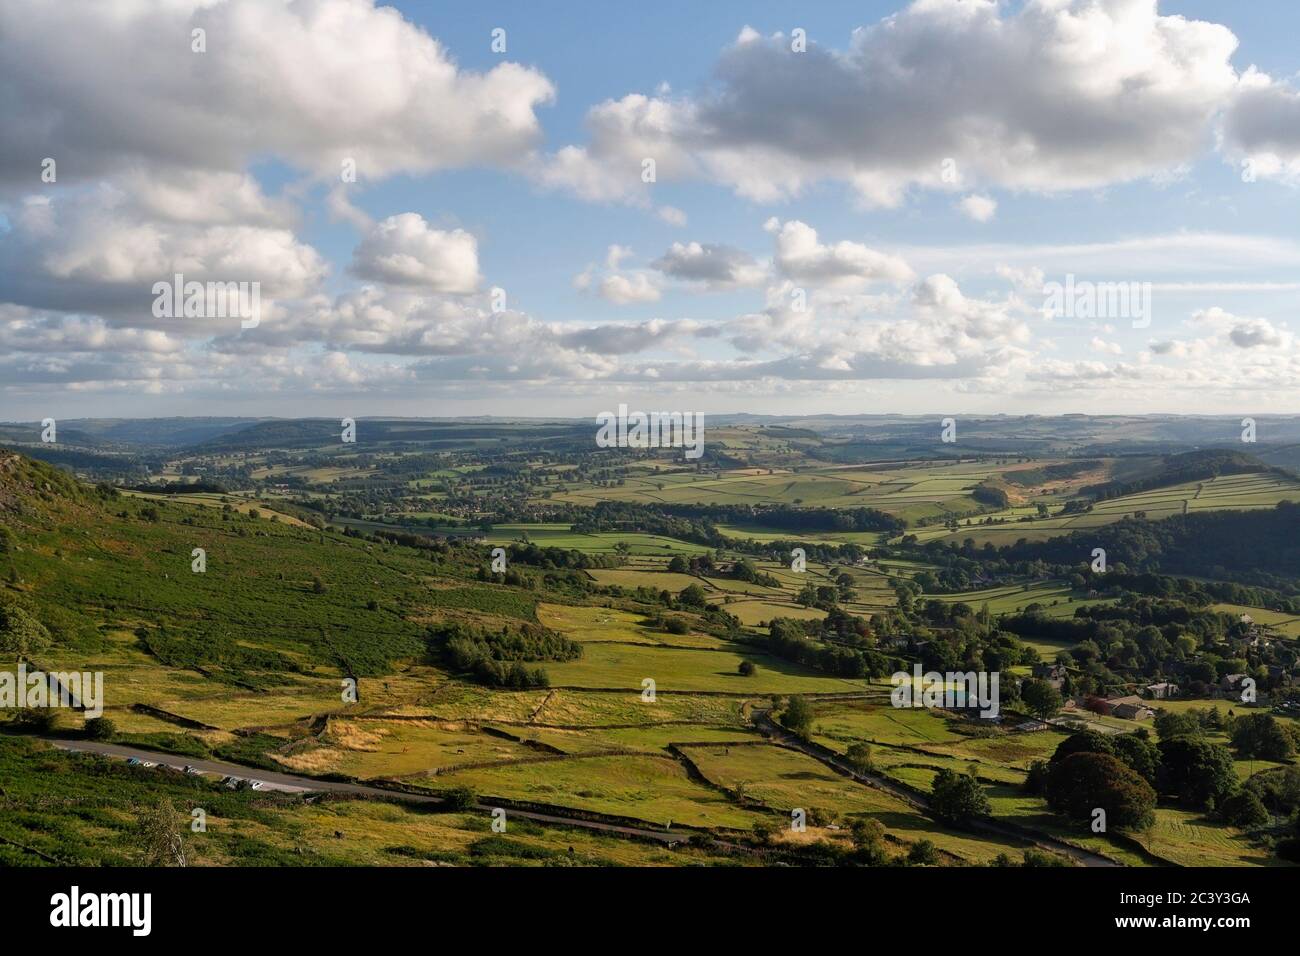 Derbyshire countryside at Curbar Edge, Peak District National Park Landscape Derbyshire England, Derwent valley English countryside, scenic view Stock Photo